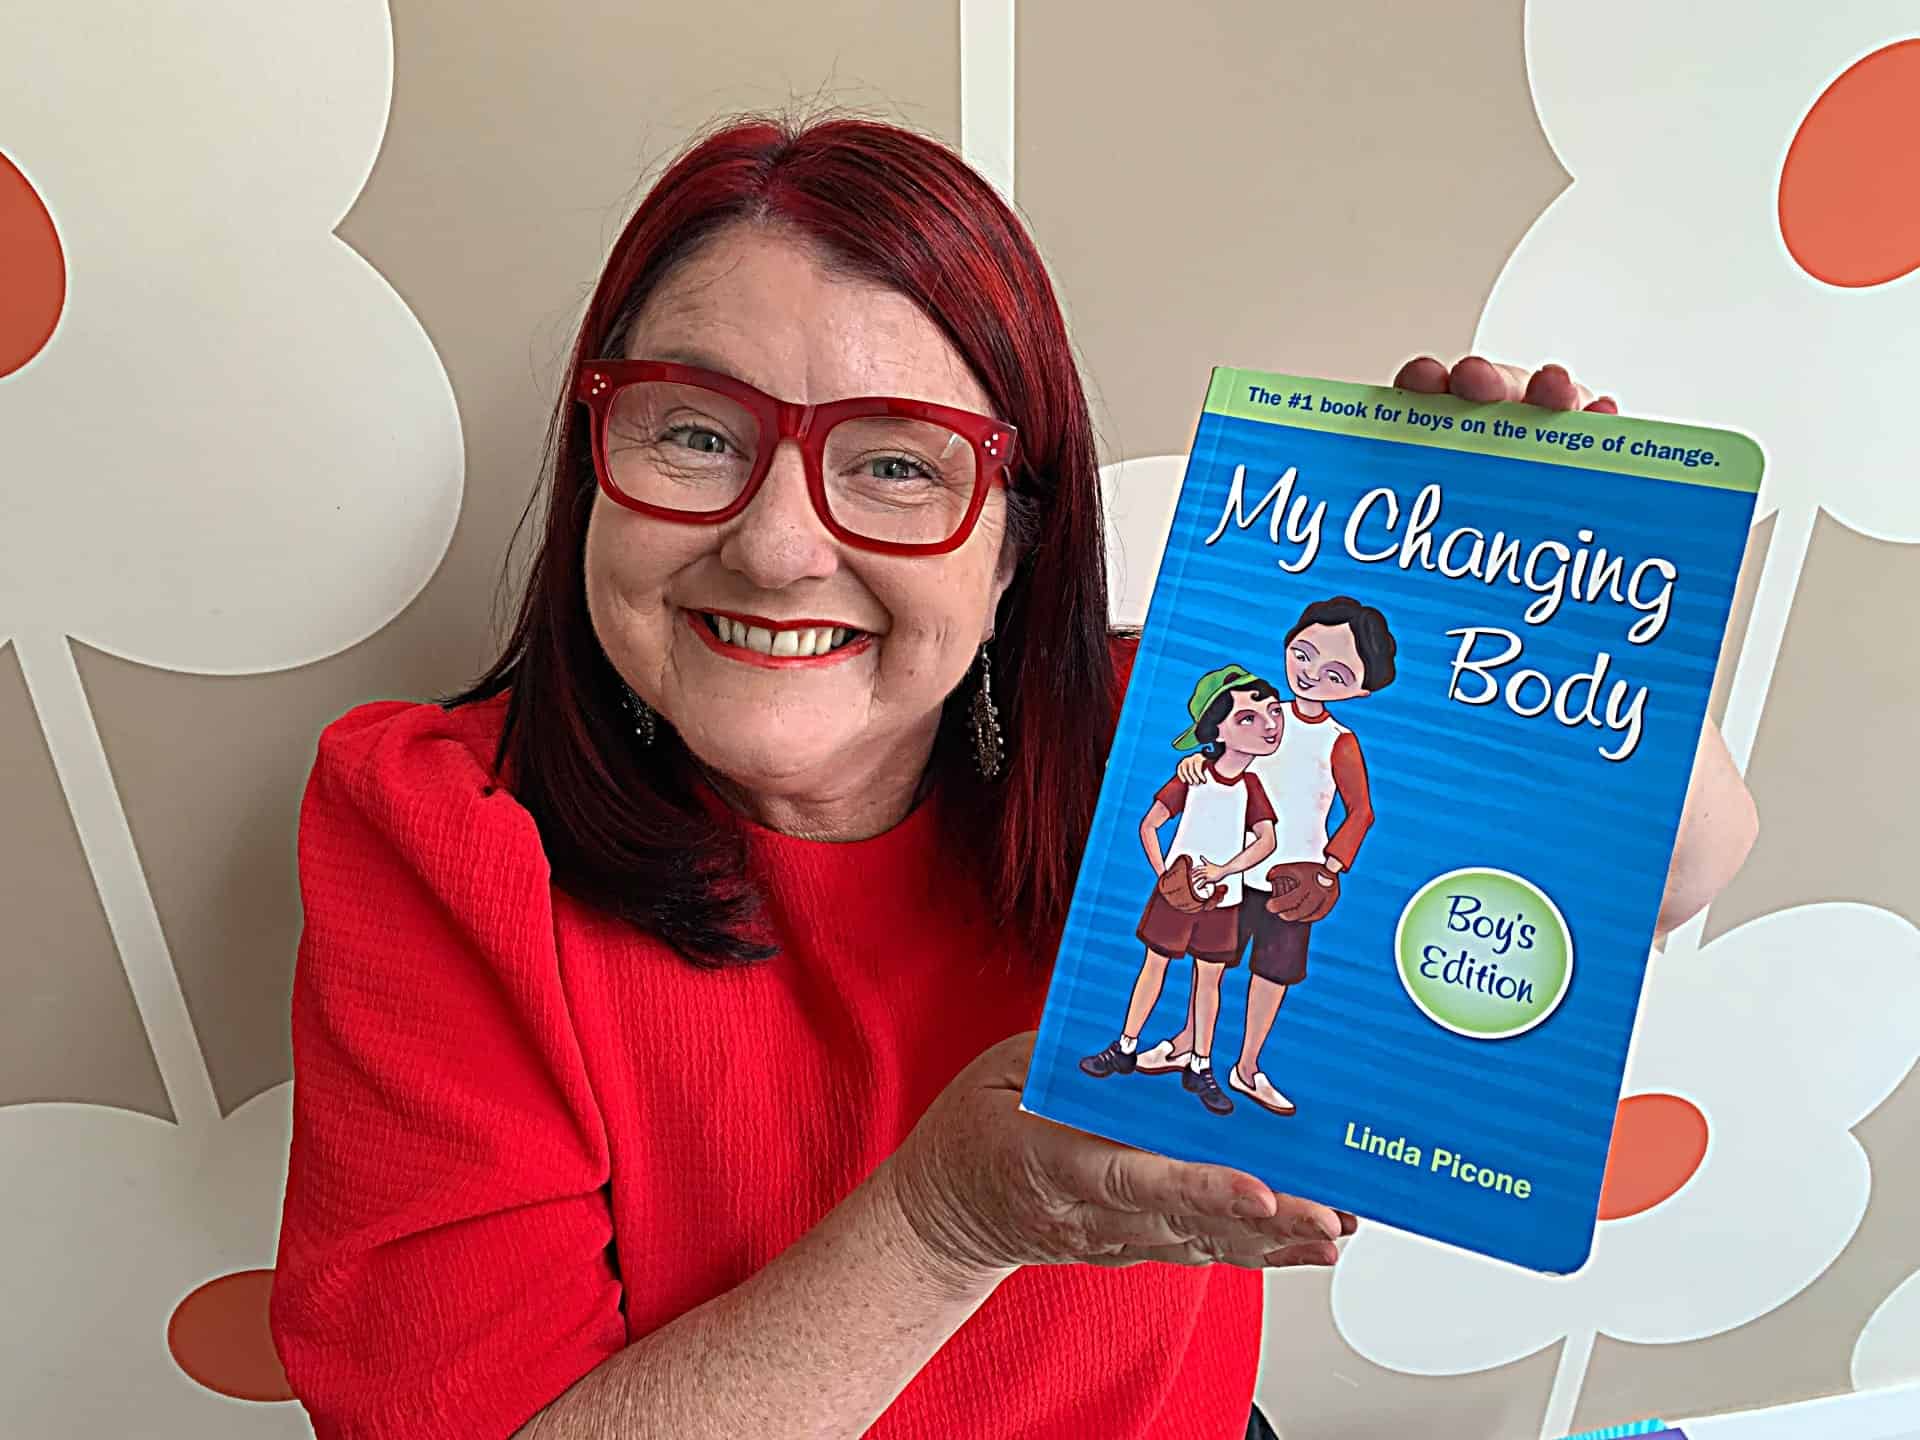 My Changing Body: Boy's Edition - Book review by Rowena Thomas | 'Amazing Me'